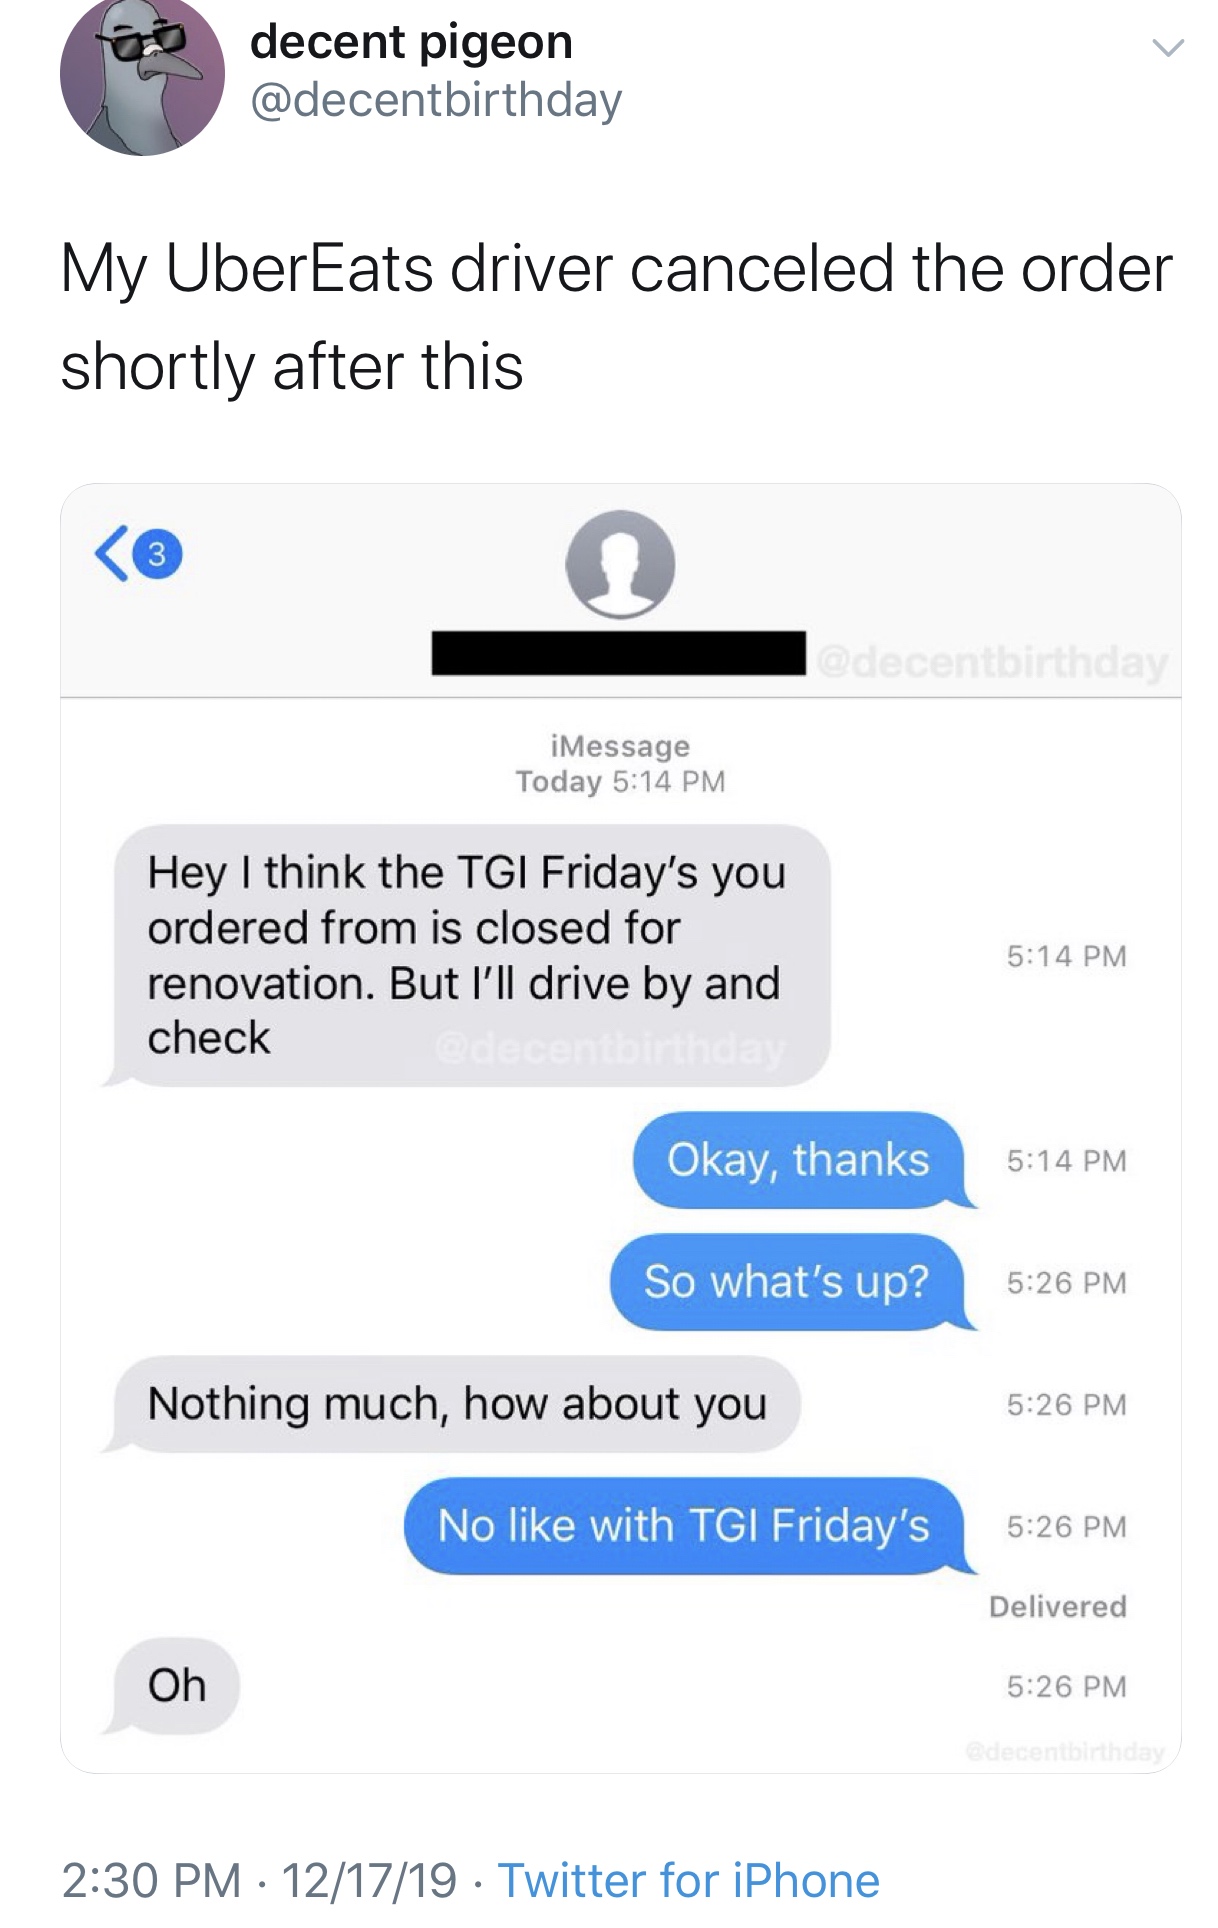 web page - decent pigeon My UberEats driver canceled the order shortly after this iMessage Today Hey I think the Tgi Friday's you ordered from is closed for renovation. But I'll drive by and check Okay, thanks So what's up? Nothing much, how about you No 